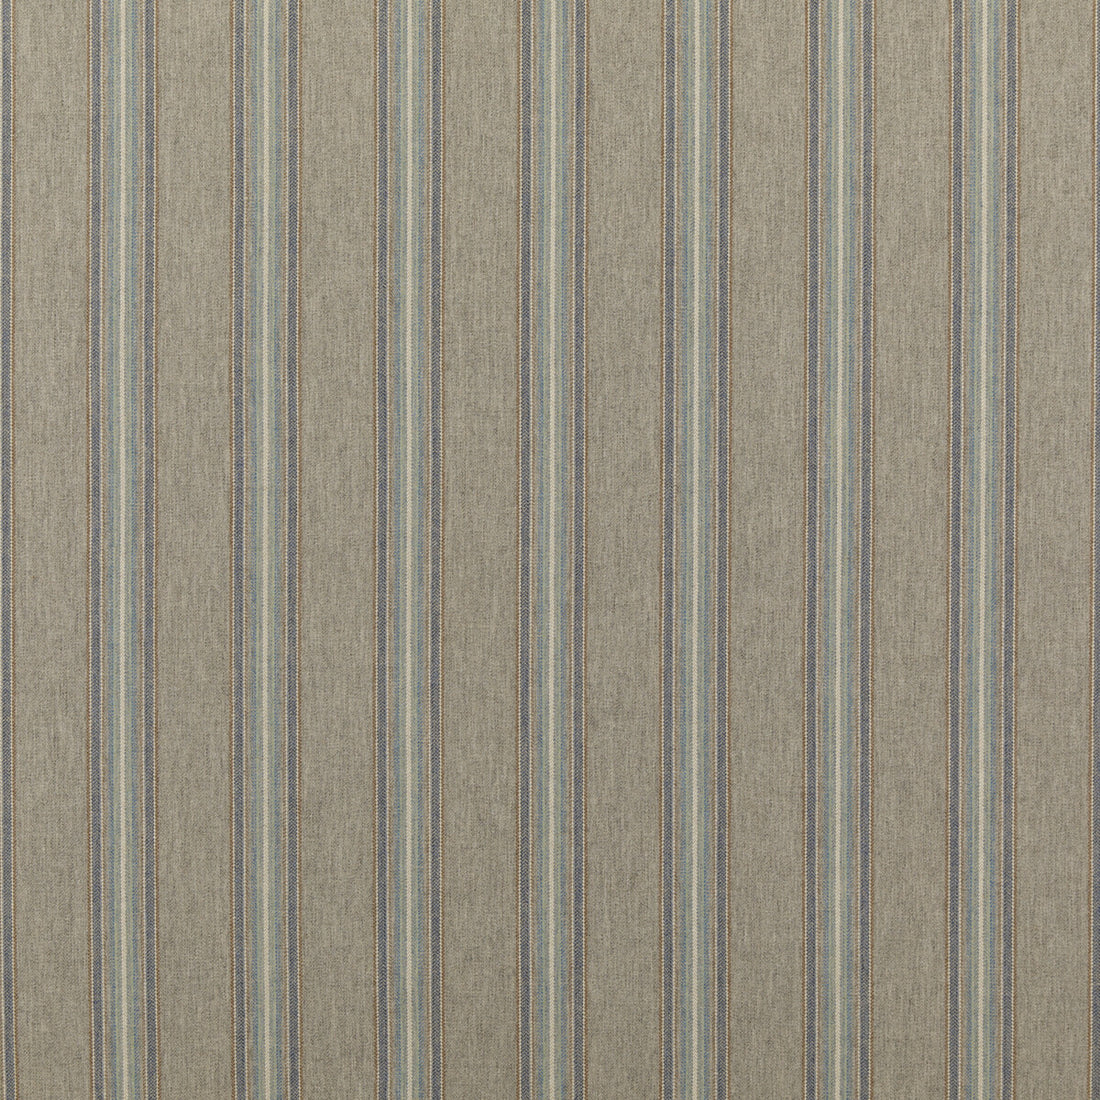 Belmont fabric in verdigiris color - pattern FD774.R49.0 - by Mulberry in the Modern Country collection